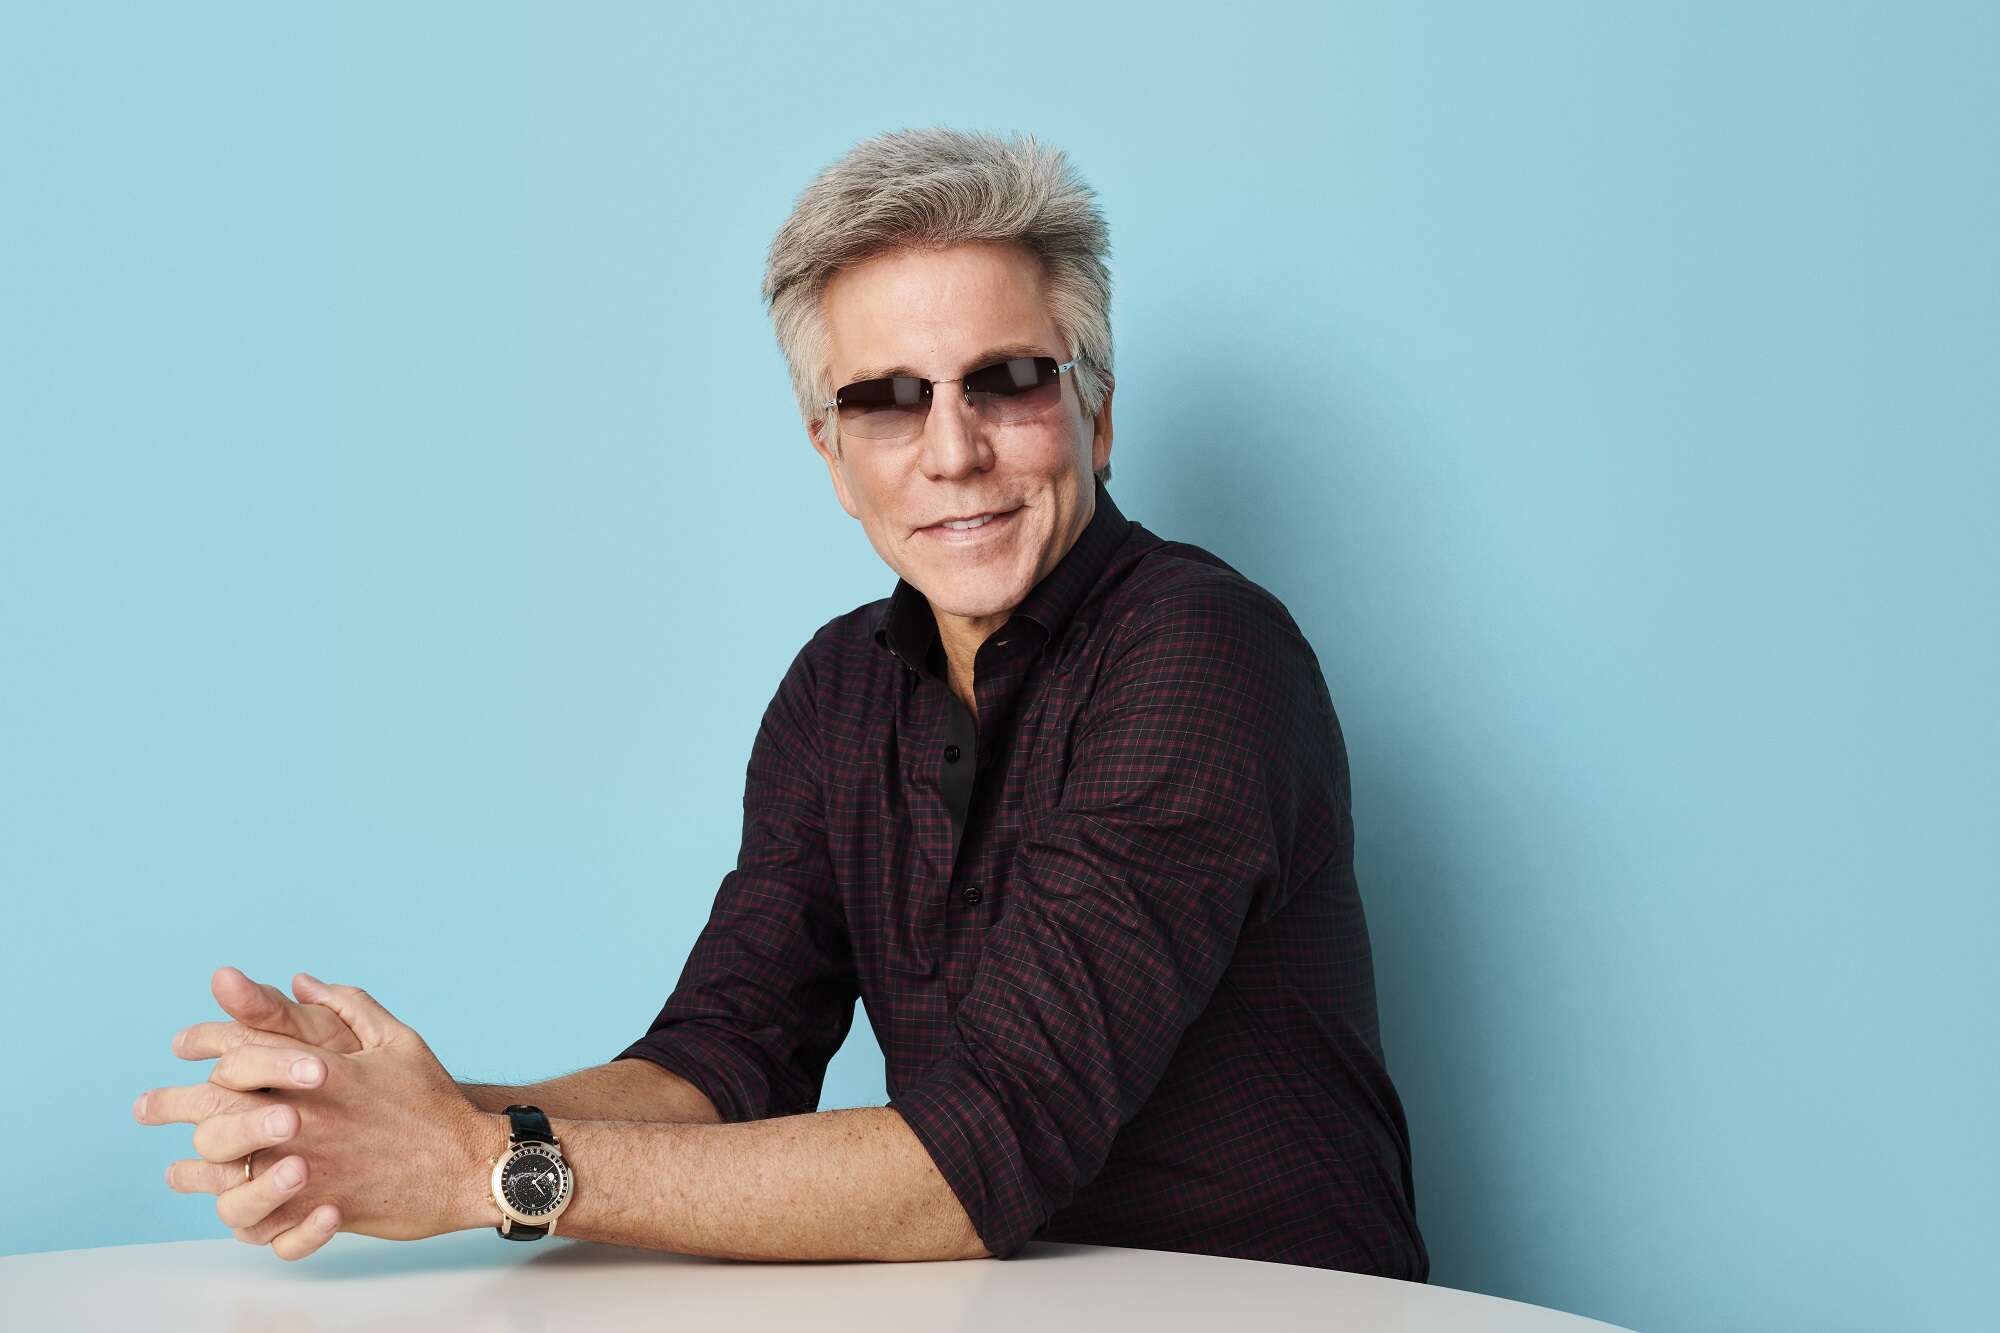 The Big Interview: Bill McDermott, CEO, ServiceNow, on Life After SAP